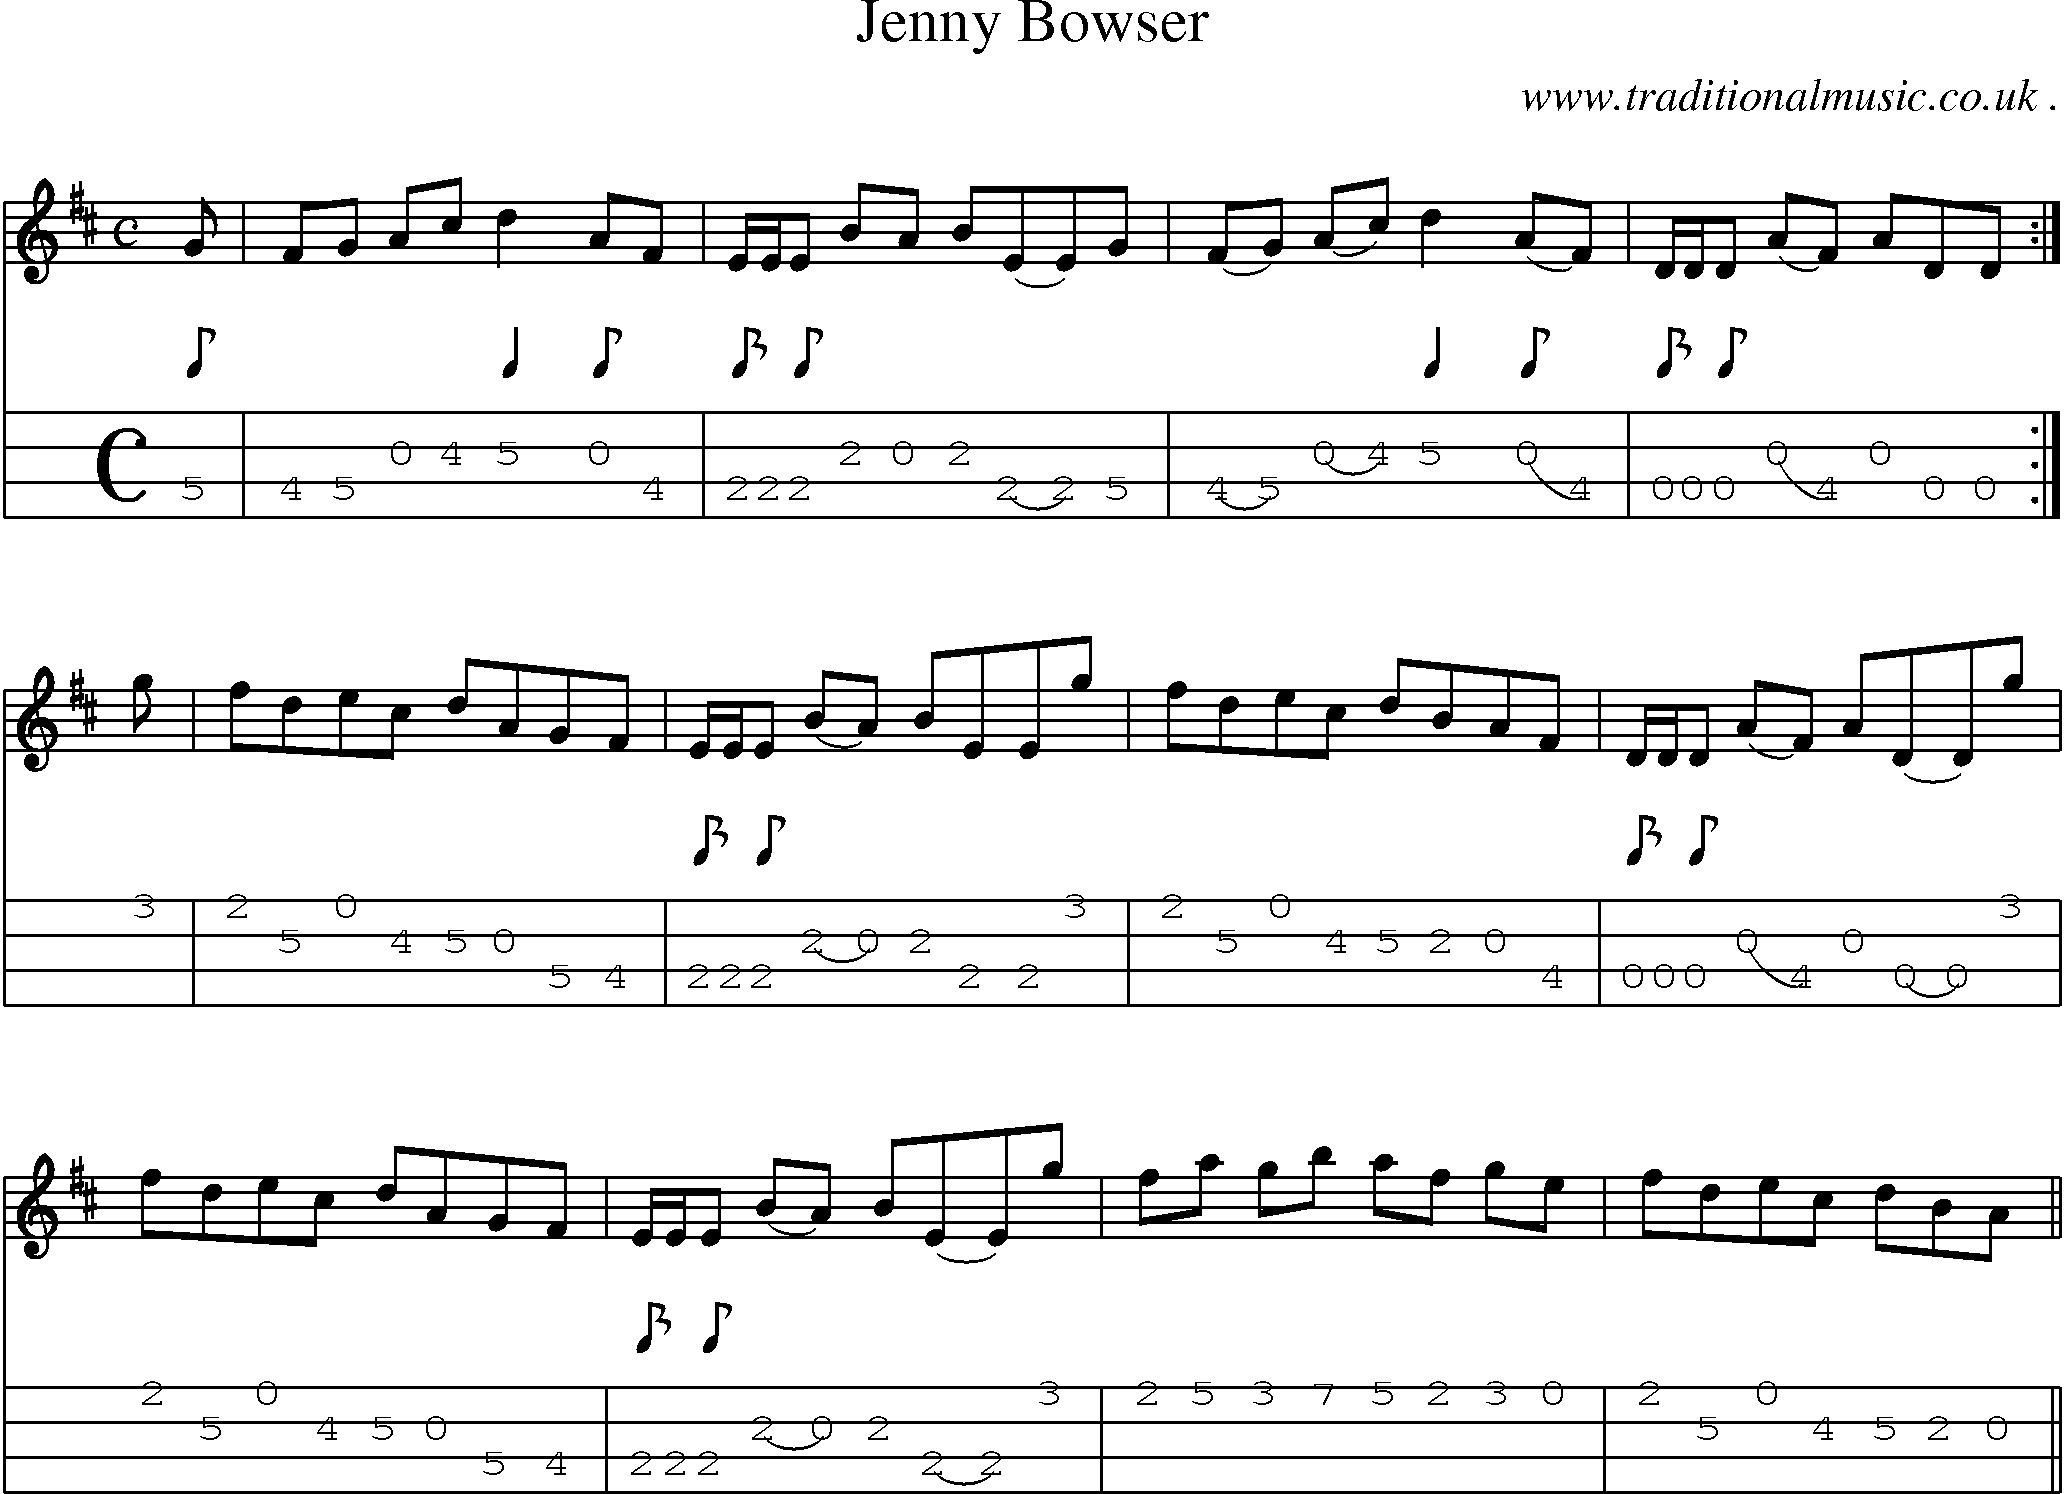 Sheet-music  score, Chords and Mandolin Tabs for Jenny Bowser